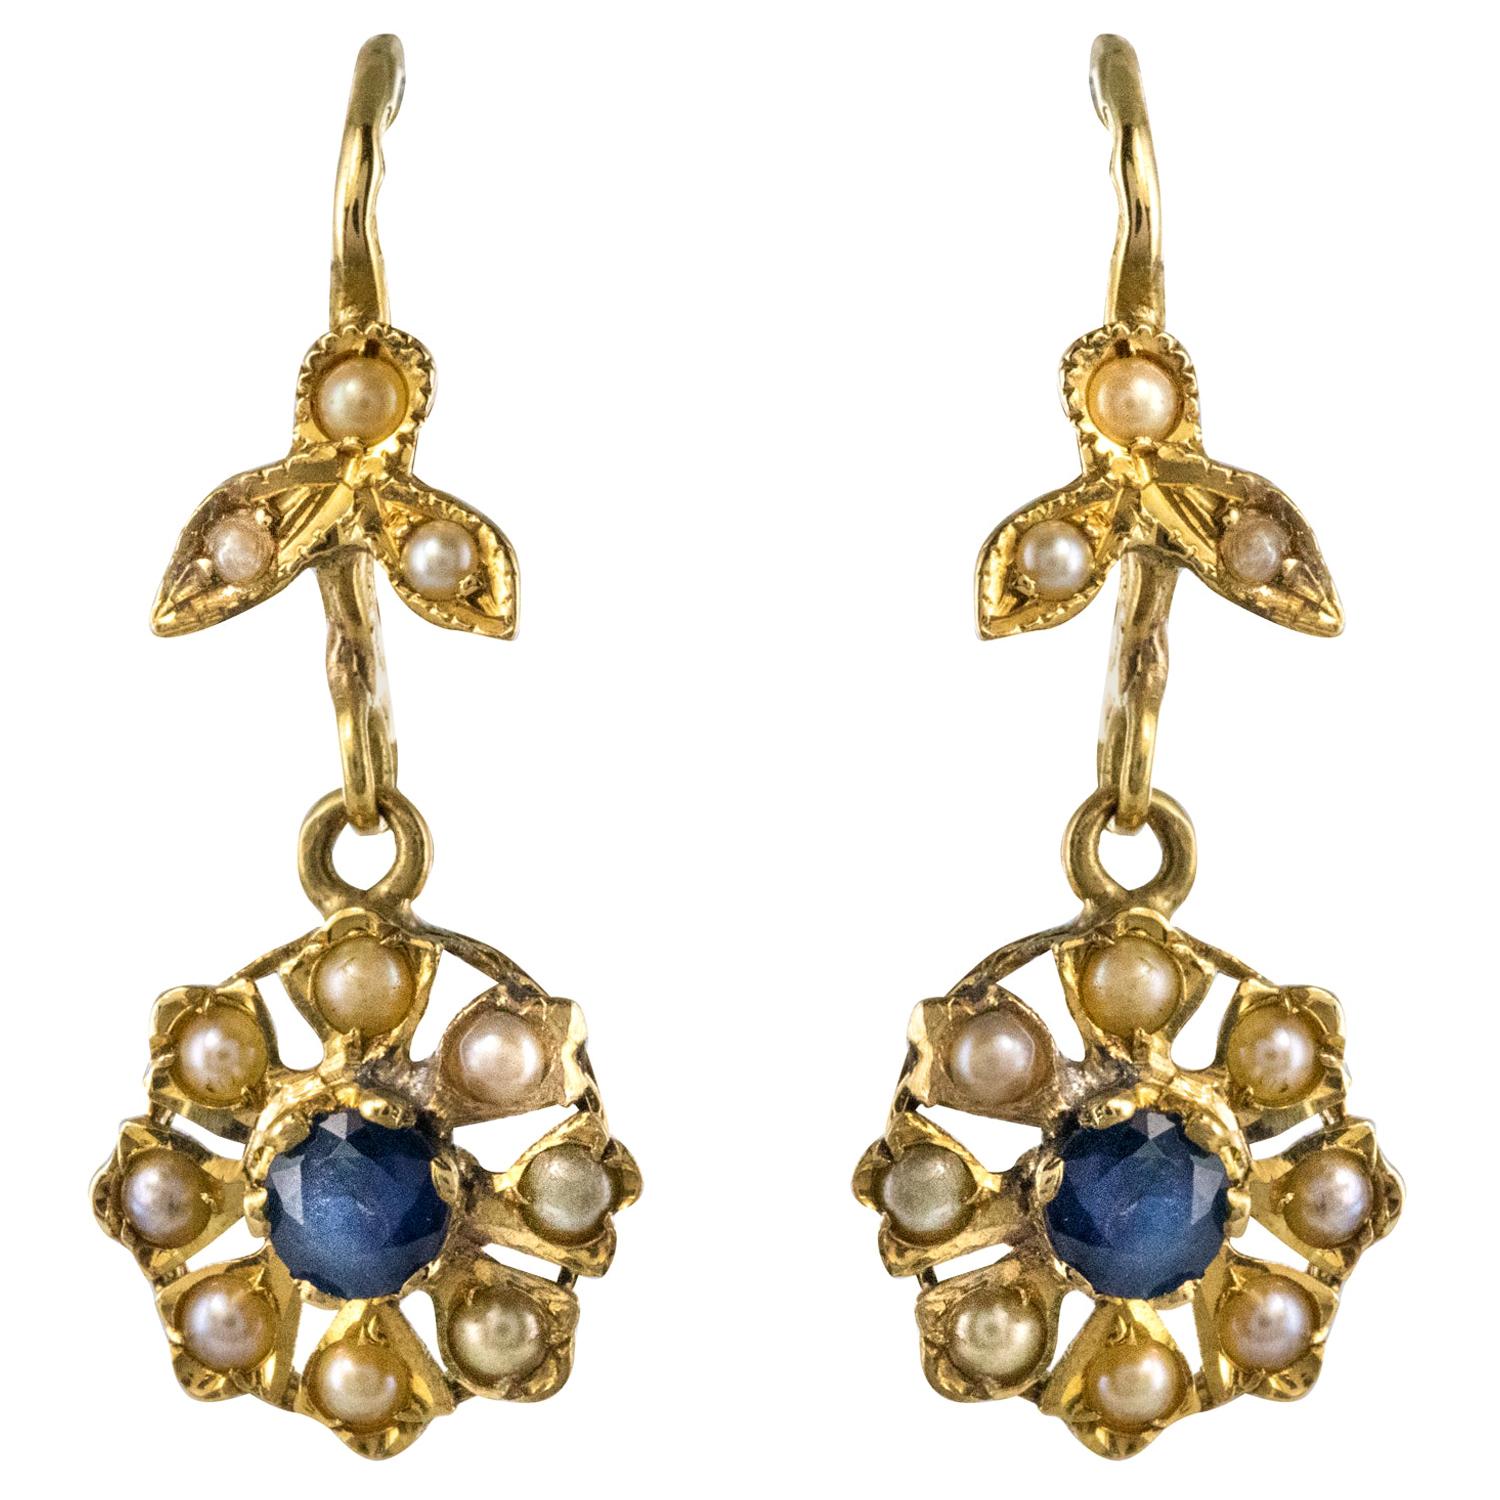 1900s French Belle Époque Sapphire Natural Pearl Earrings